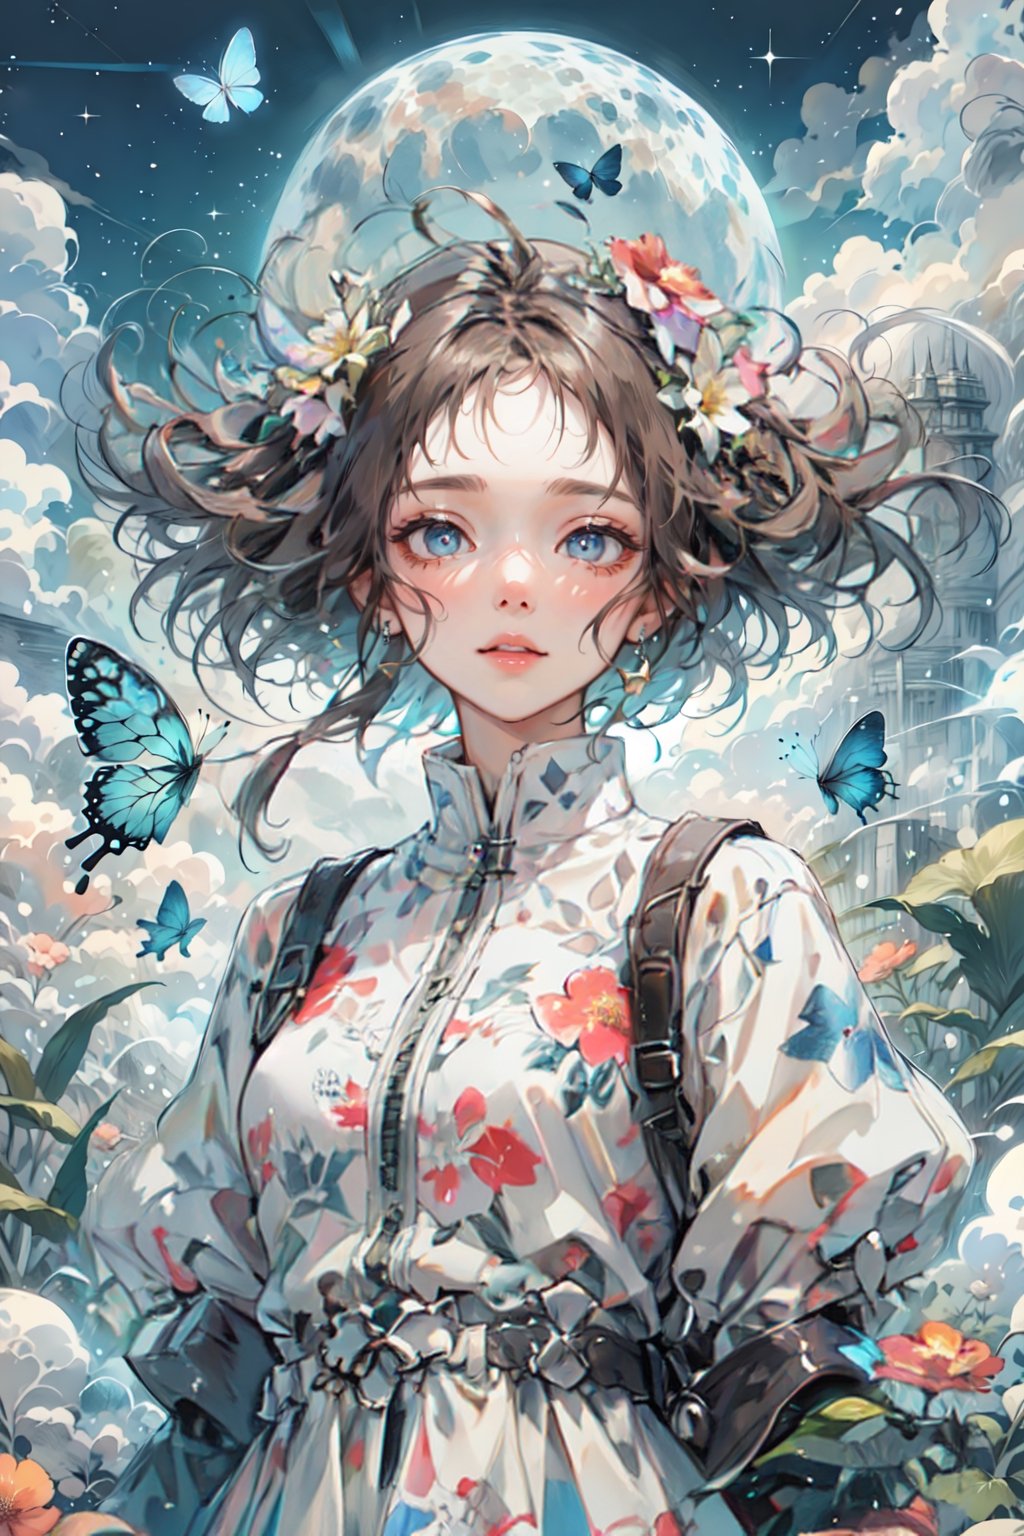 Maximalism, masterpiece, top quality, 8k, high resolution, super detailed, absurd, vivid contrast, insanely detailed,
BREAK
1girl, (Beautiful face, brightly colored shining eyes, clear skin, shiny hair: 1.2),
BREAK
(Flowers, butterflies, wind, moon:1.3)
BREAK
(Full-length composition:1.4),girl, CrclWc,dragonbaby